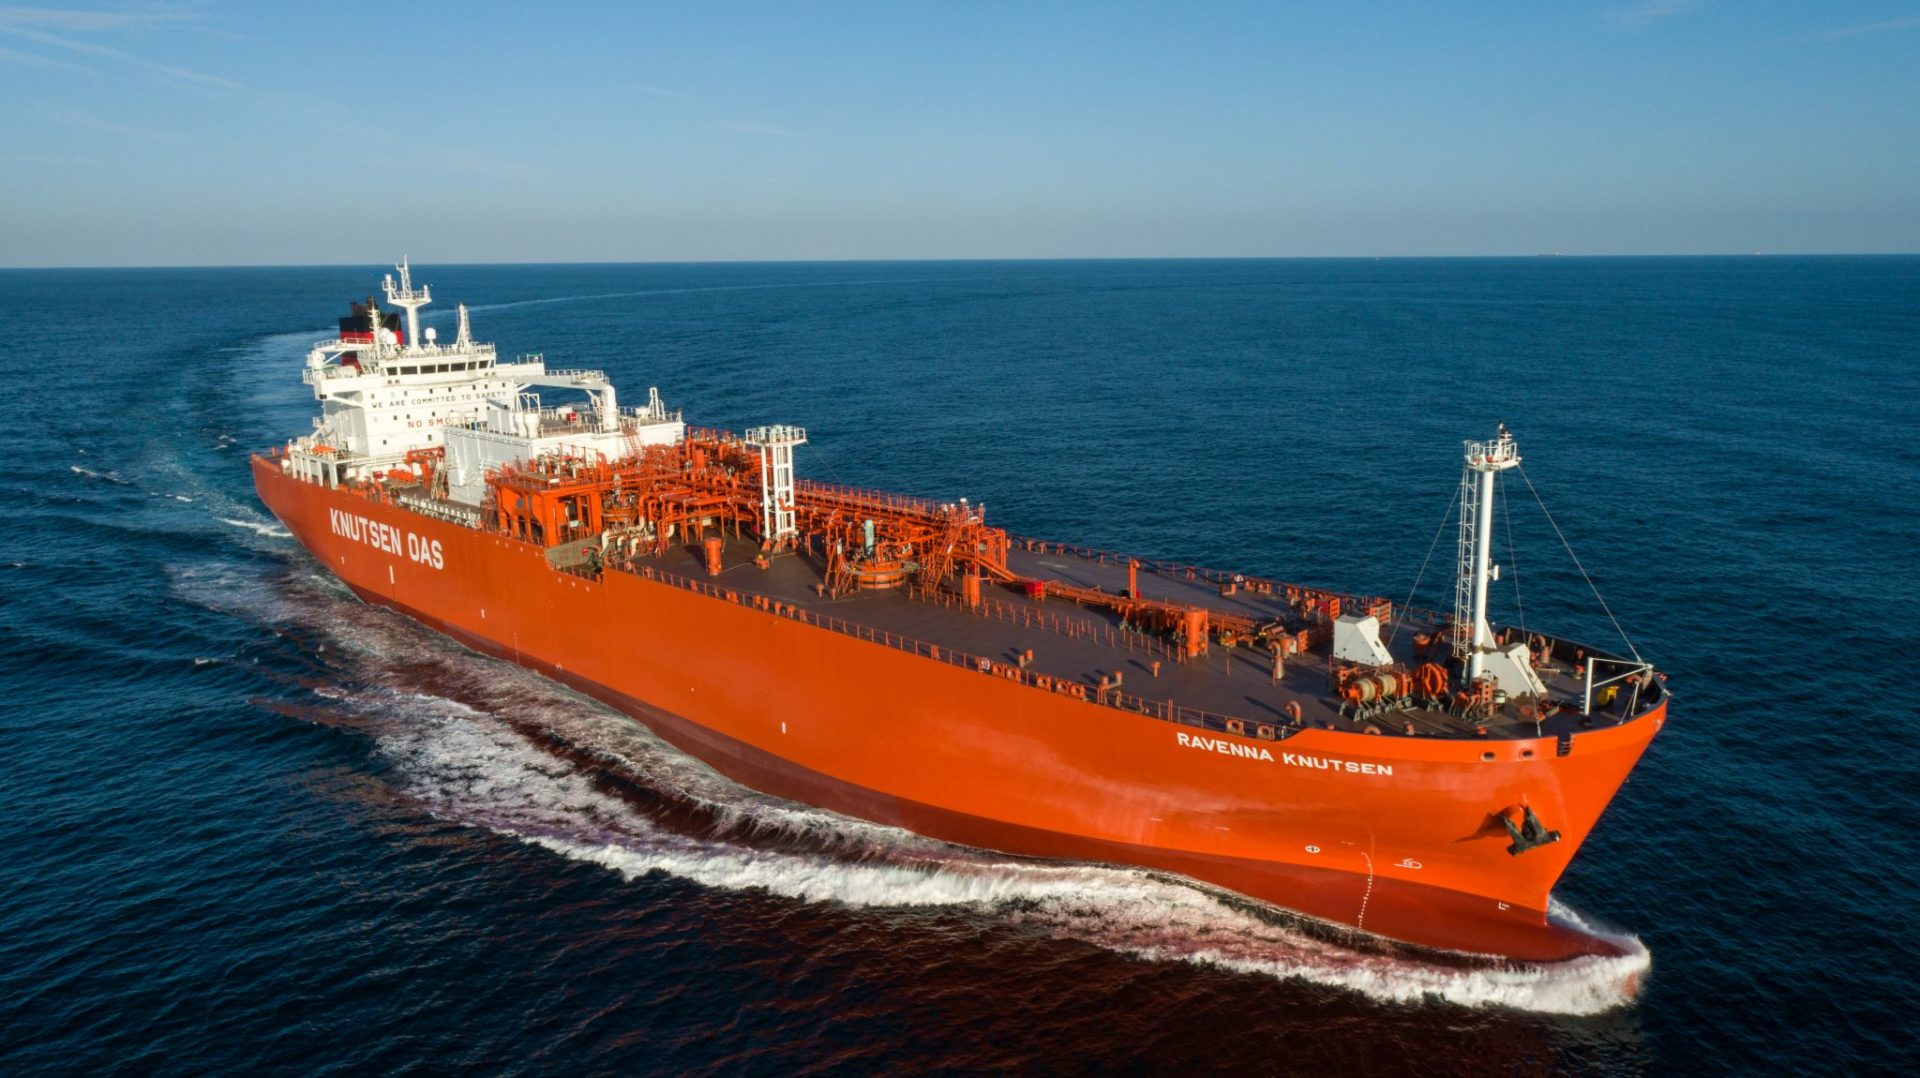 Edison, Knutsen name small-scale LNG carrier in Ravenna